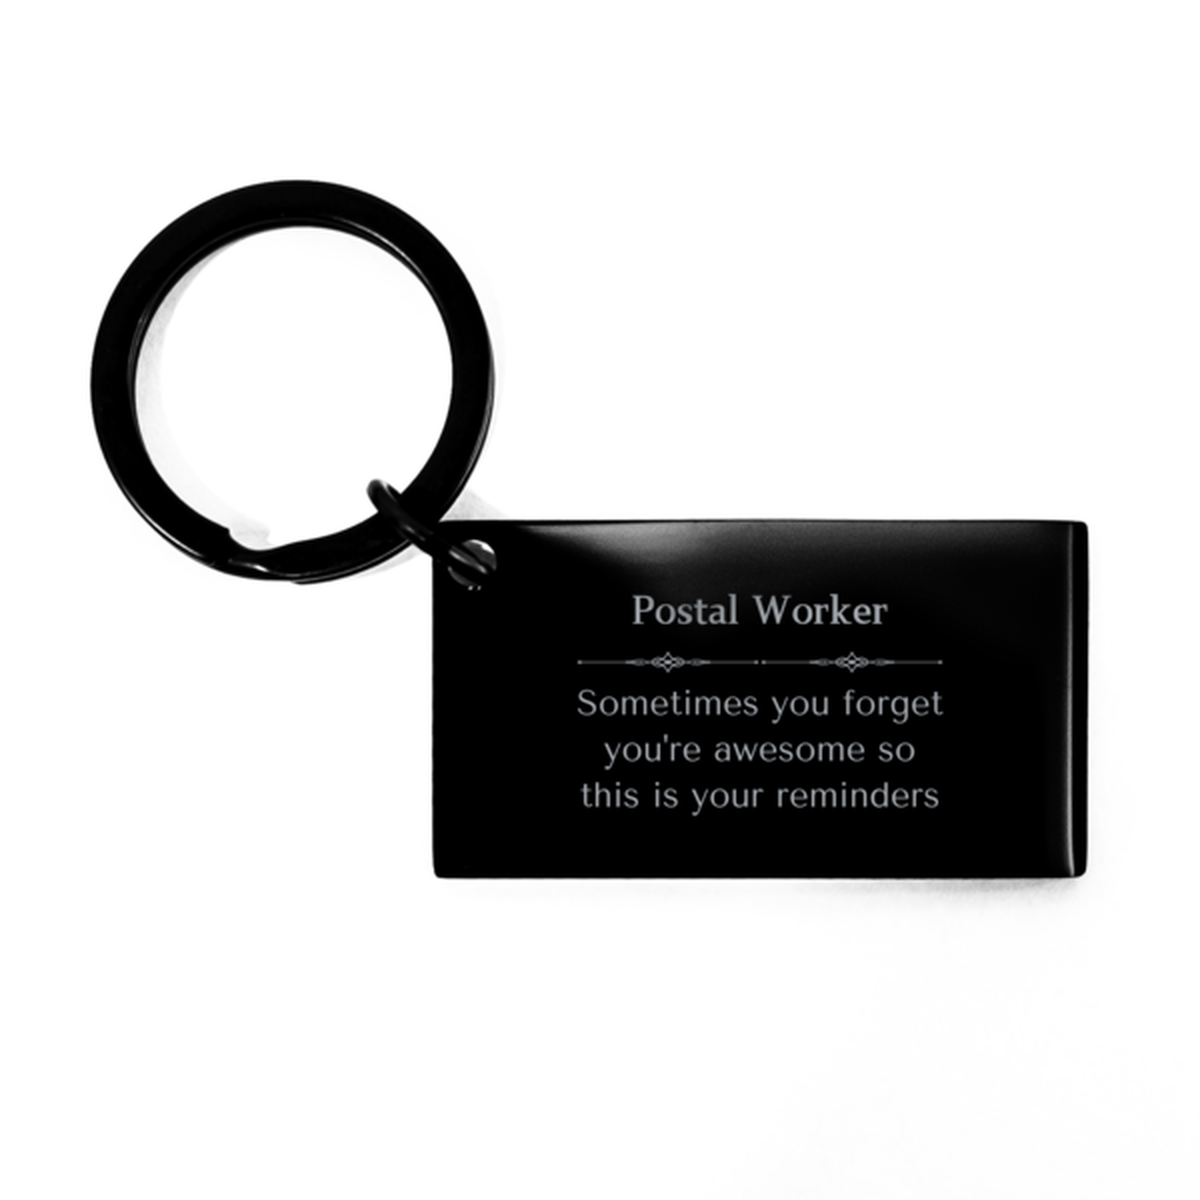 Sentimental Postal Worker Keychain, Security Guard Sometimes you forget you're awesome so this is your reminders, Graduation Christmas Birthday Gifts for Postal Worker, Men, Women, Coworkers